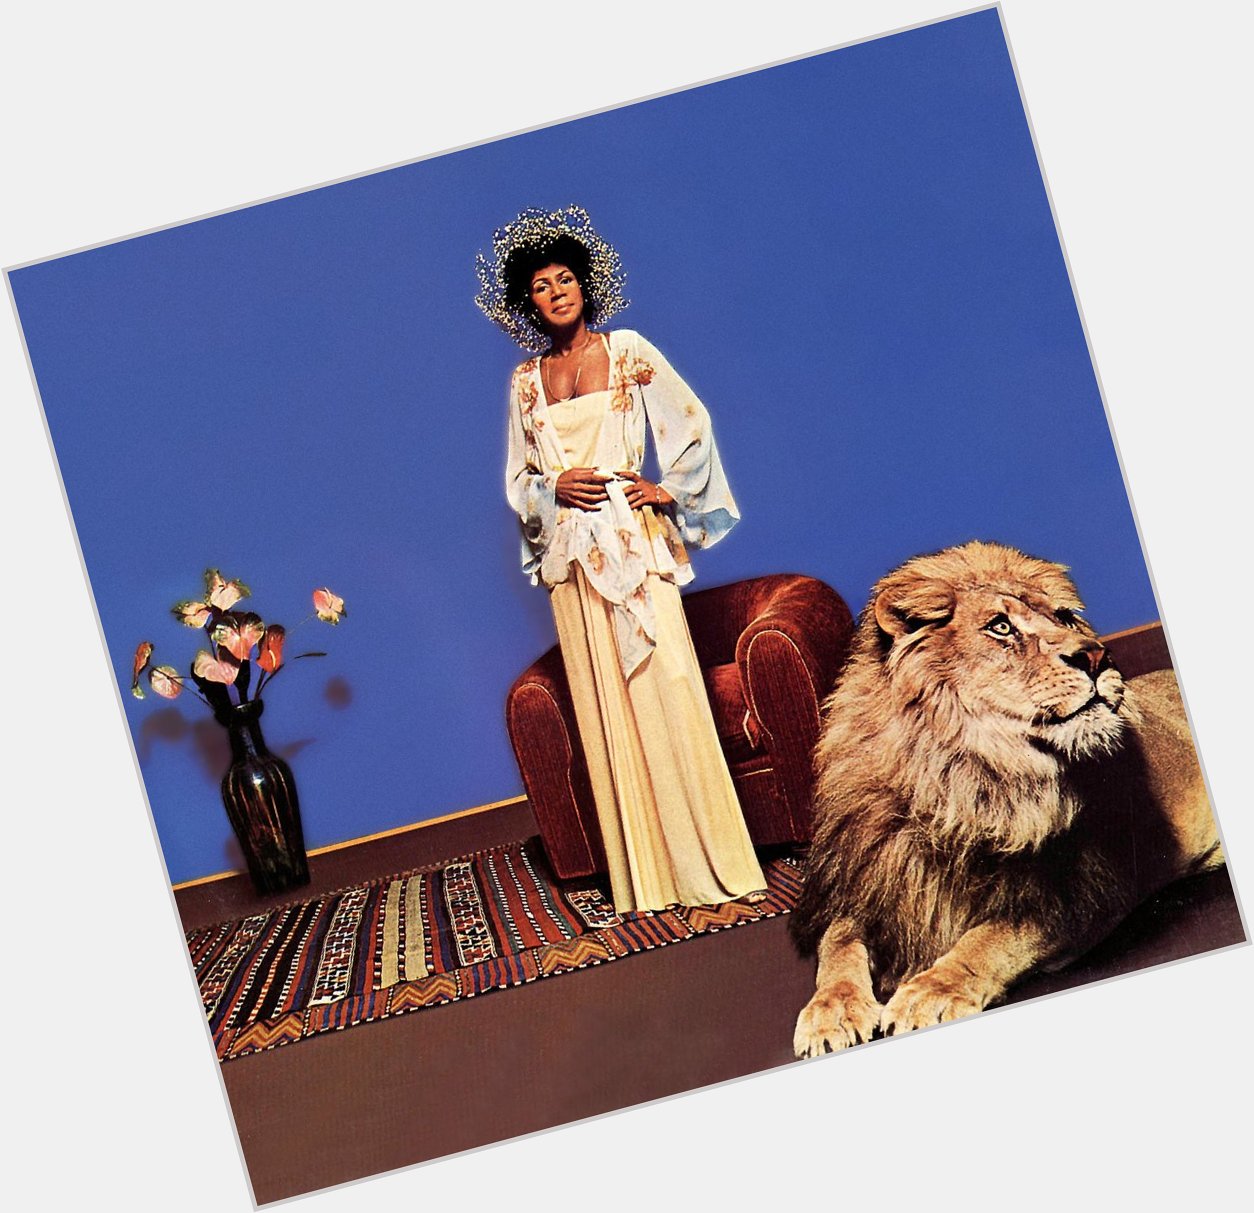 Happy Birthday to Minnie Riperton, who would have turned 70 today! 